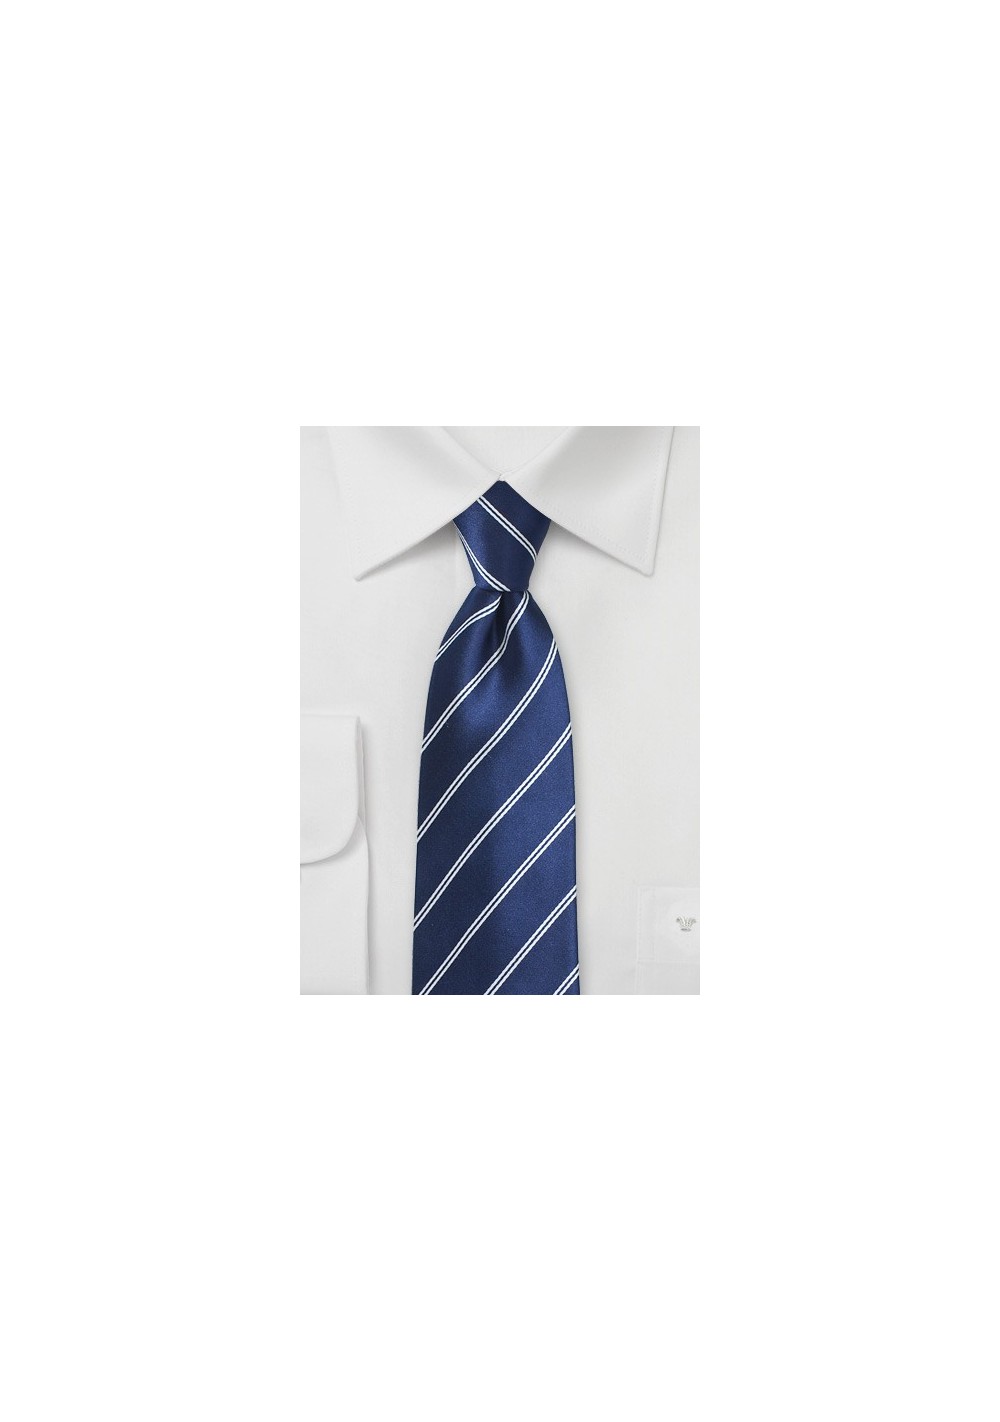 Classic Navy Tie with Double Pin Stripe Design